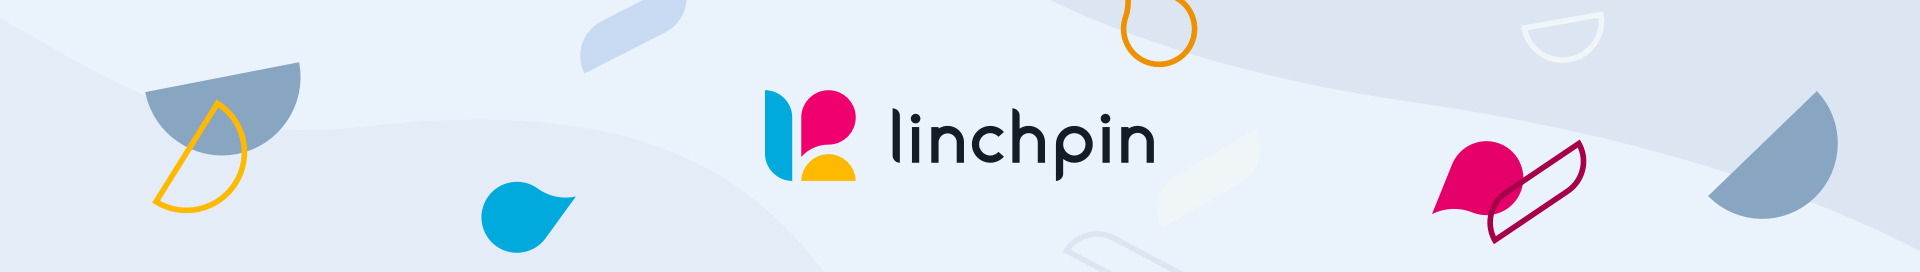 Linchpin at BSH Receives Inkometa Award for Best Intranet! - Linchpin Banner